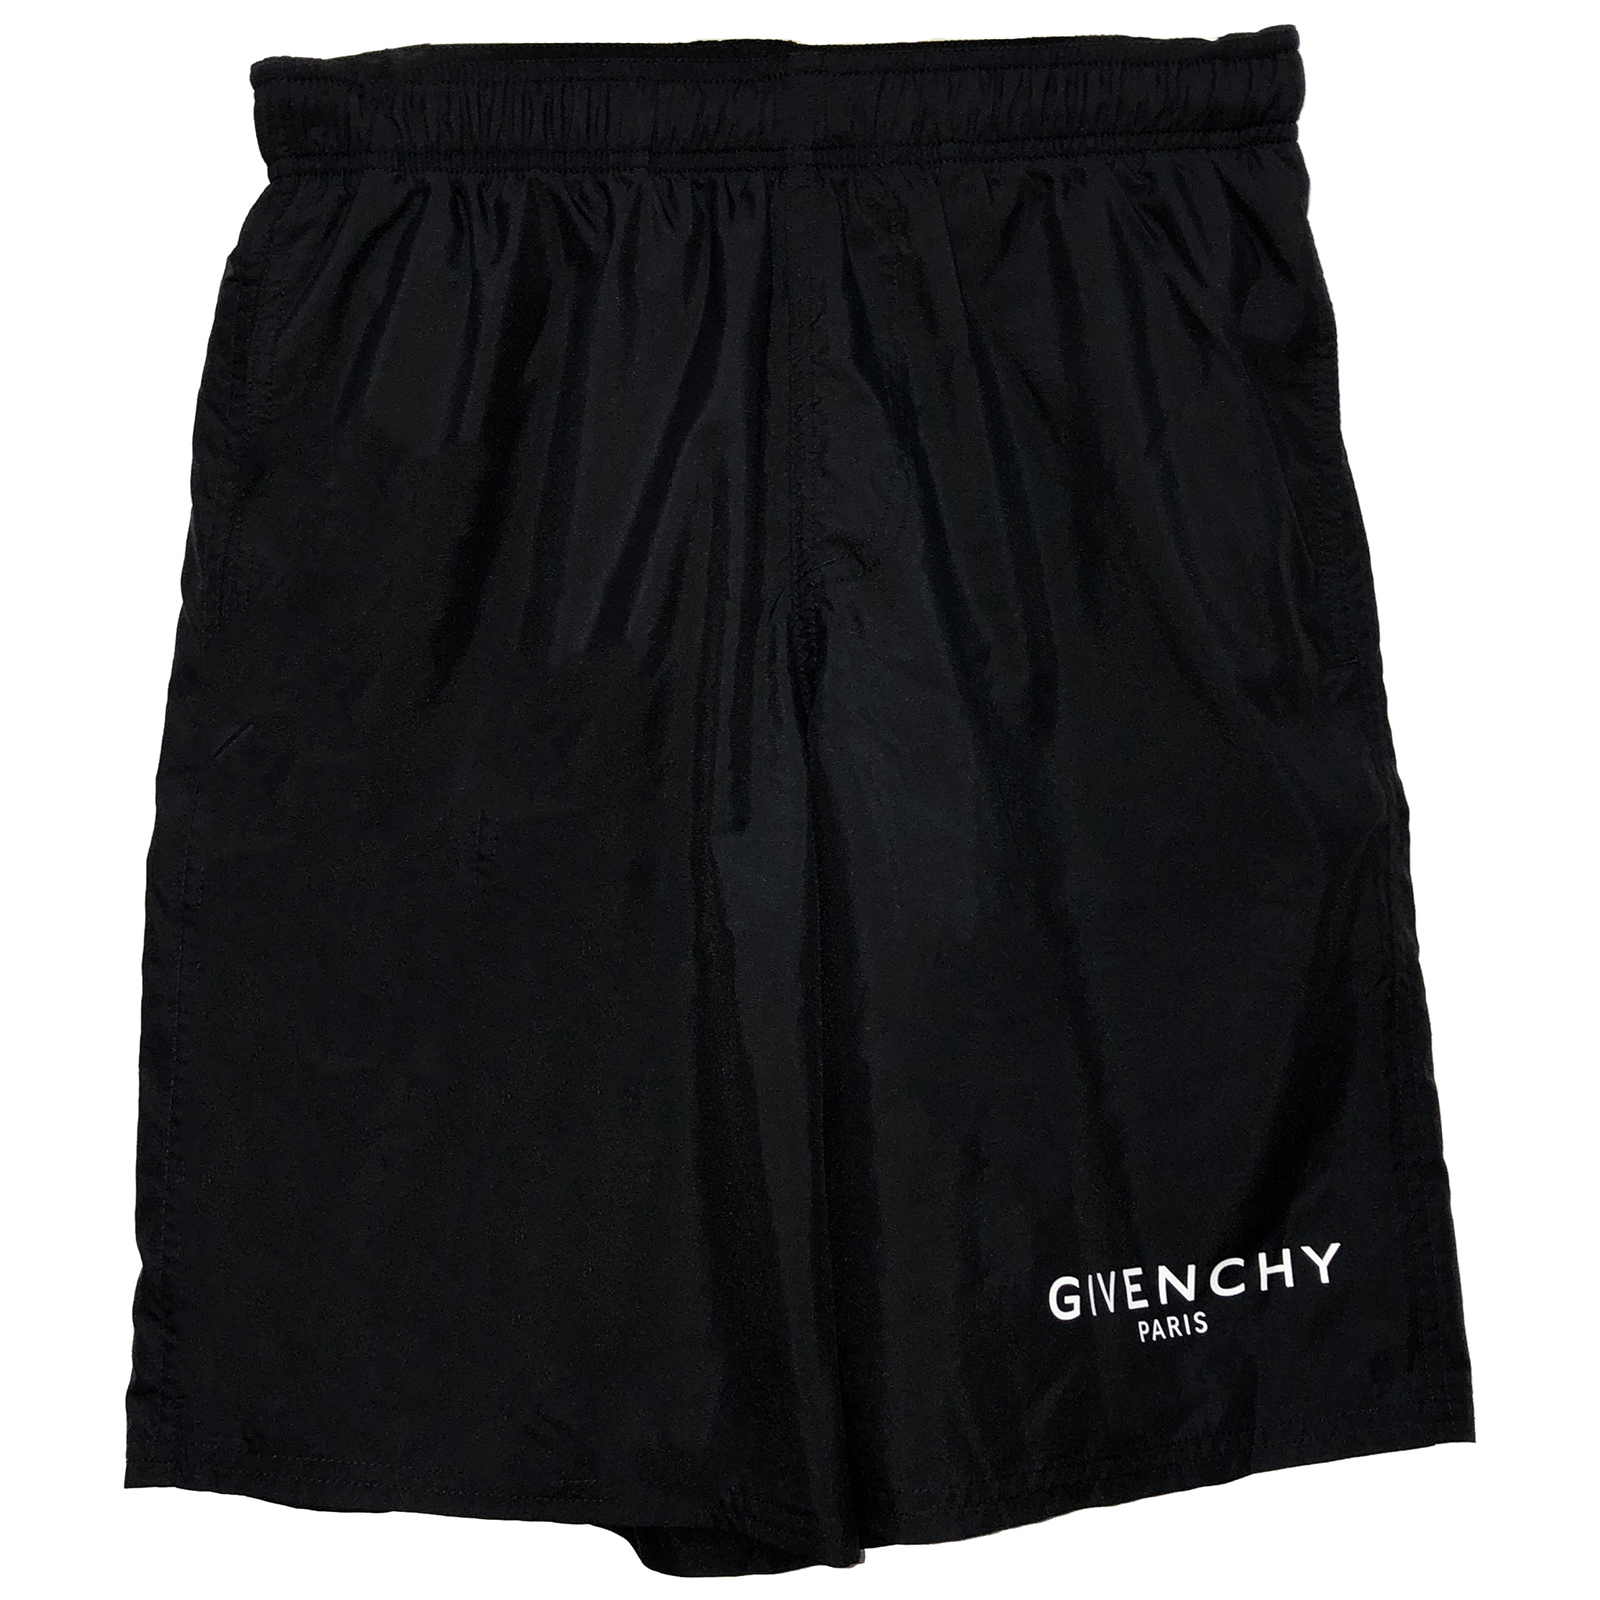 The Luxe Culture – Givenchy Logo Black Shortpants